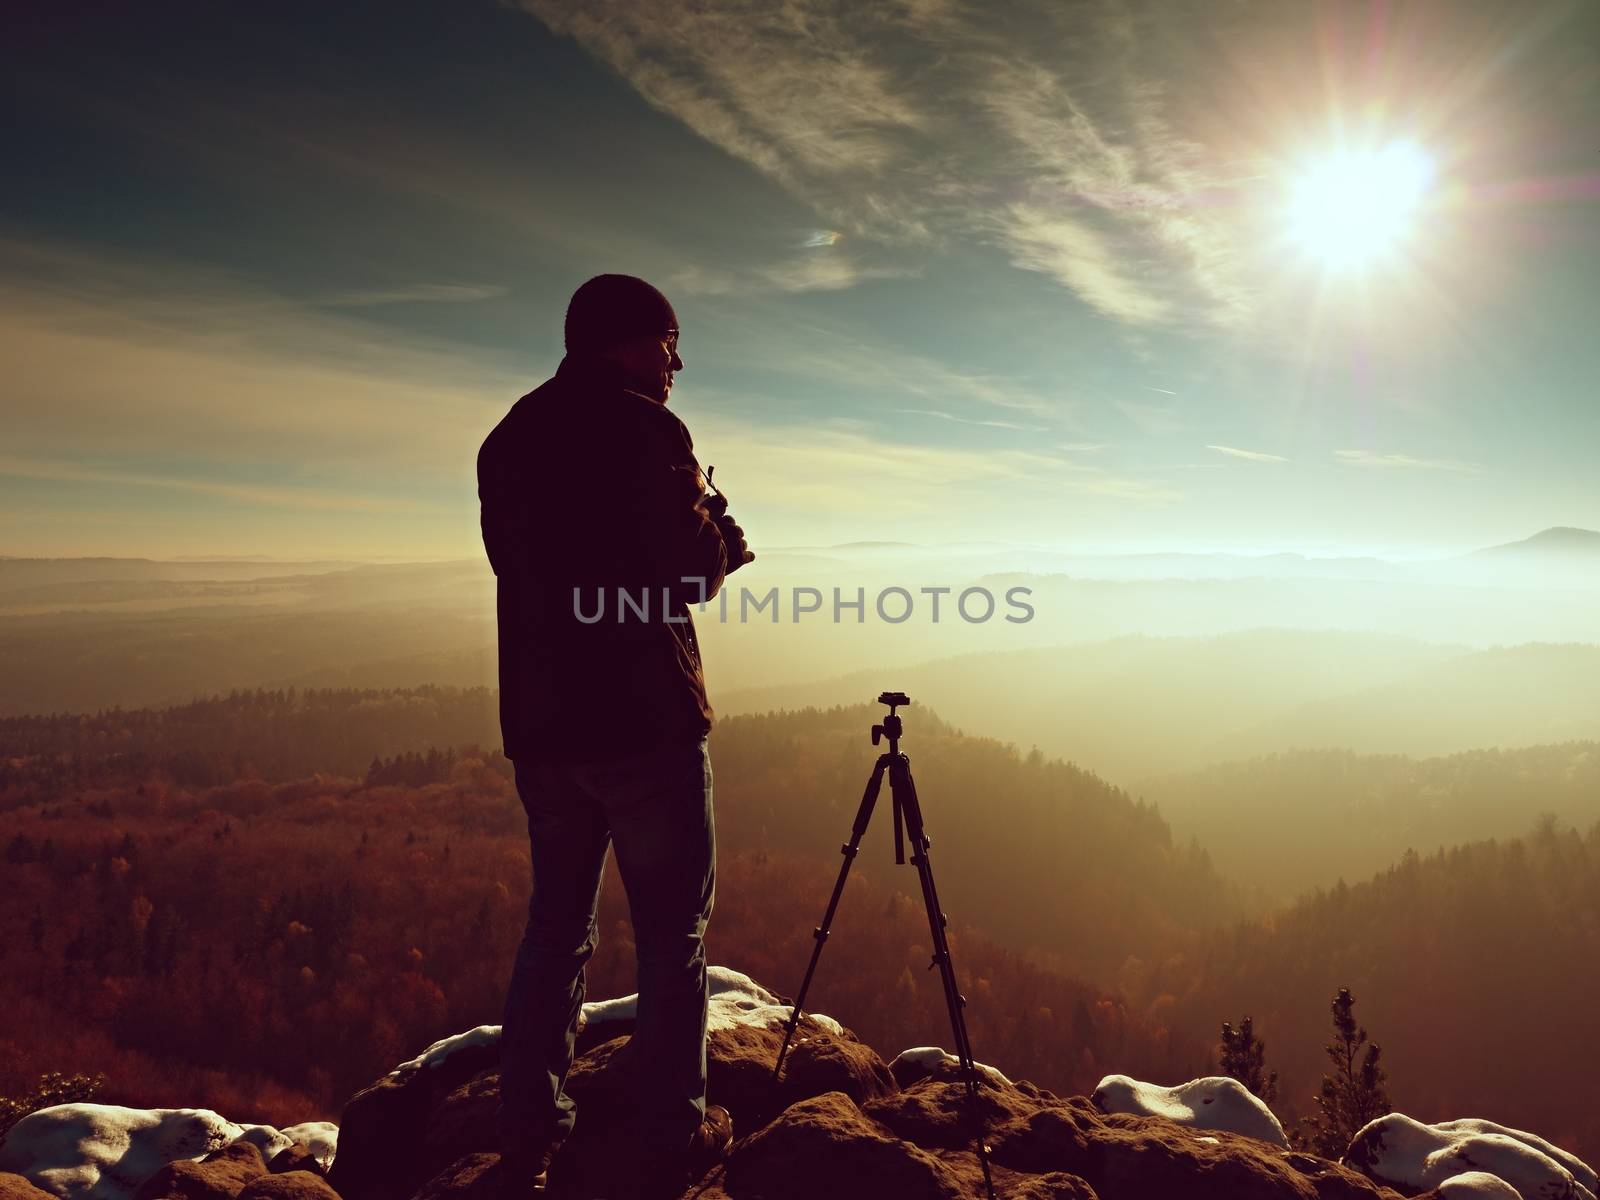 Nature photographer stay with camera ind hands  at tripod on rock and thinking. First snow. Dreamy fogy landscape, orange misty sunrise in  beautiful mountains